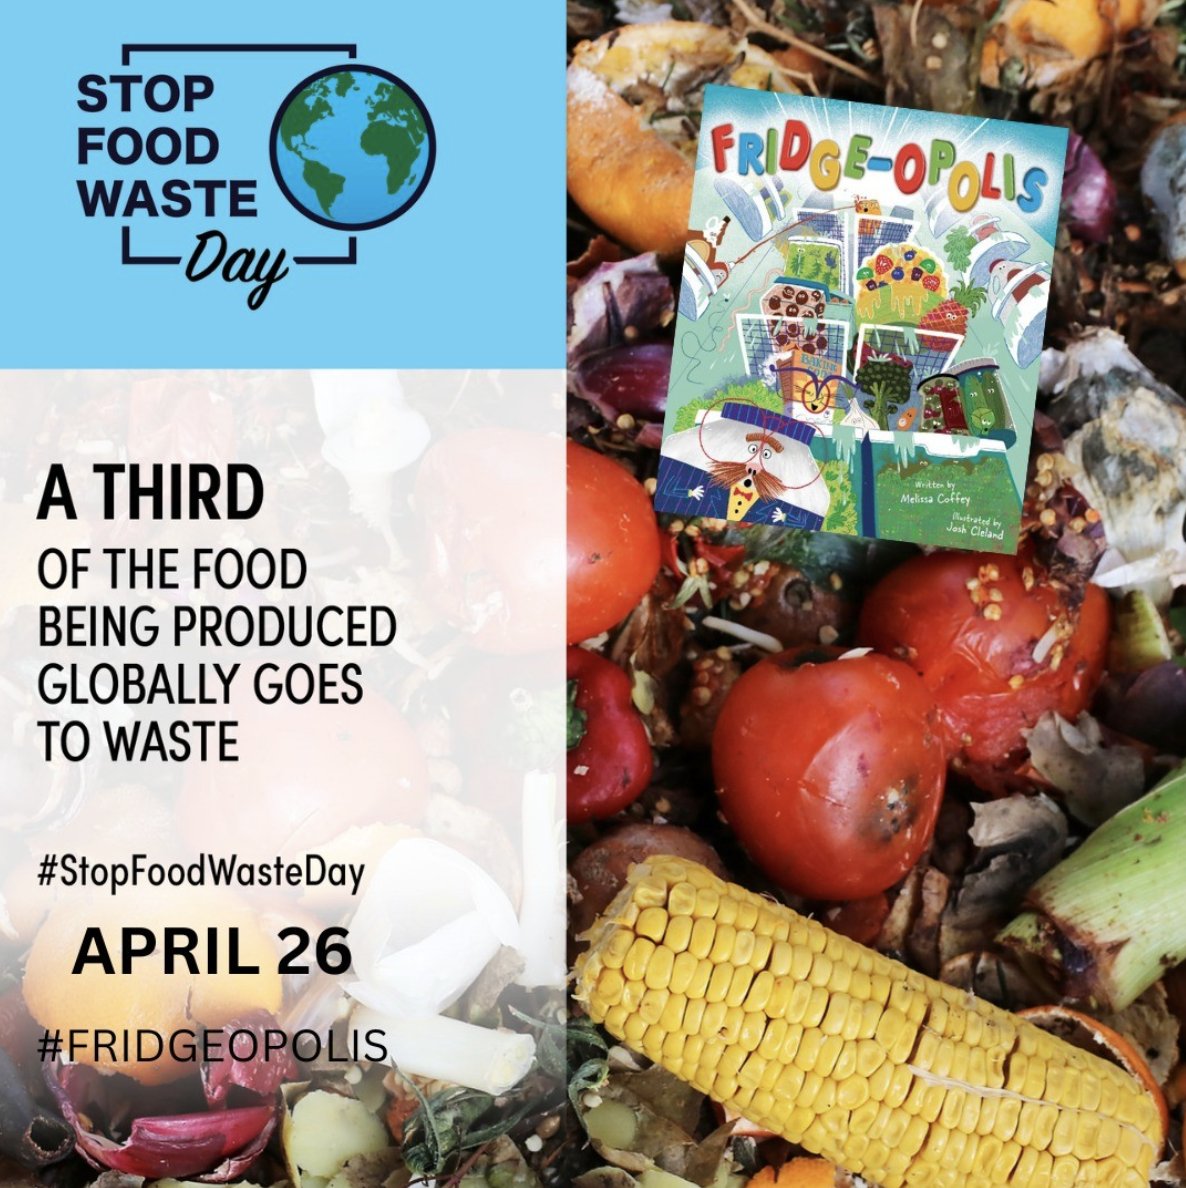 Did you know that 40% of all food goes to waste in the U.S? This #FoodWasteDay learn a lesson or two about conservation and eco-friendly habits by picking up #Fridgeopolis by @CoffeyCreative and illustrated by @JoshCleland. On sale wherever books are sold. 🍏

#BeeAReader🐝